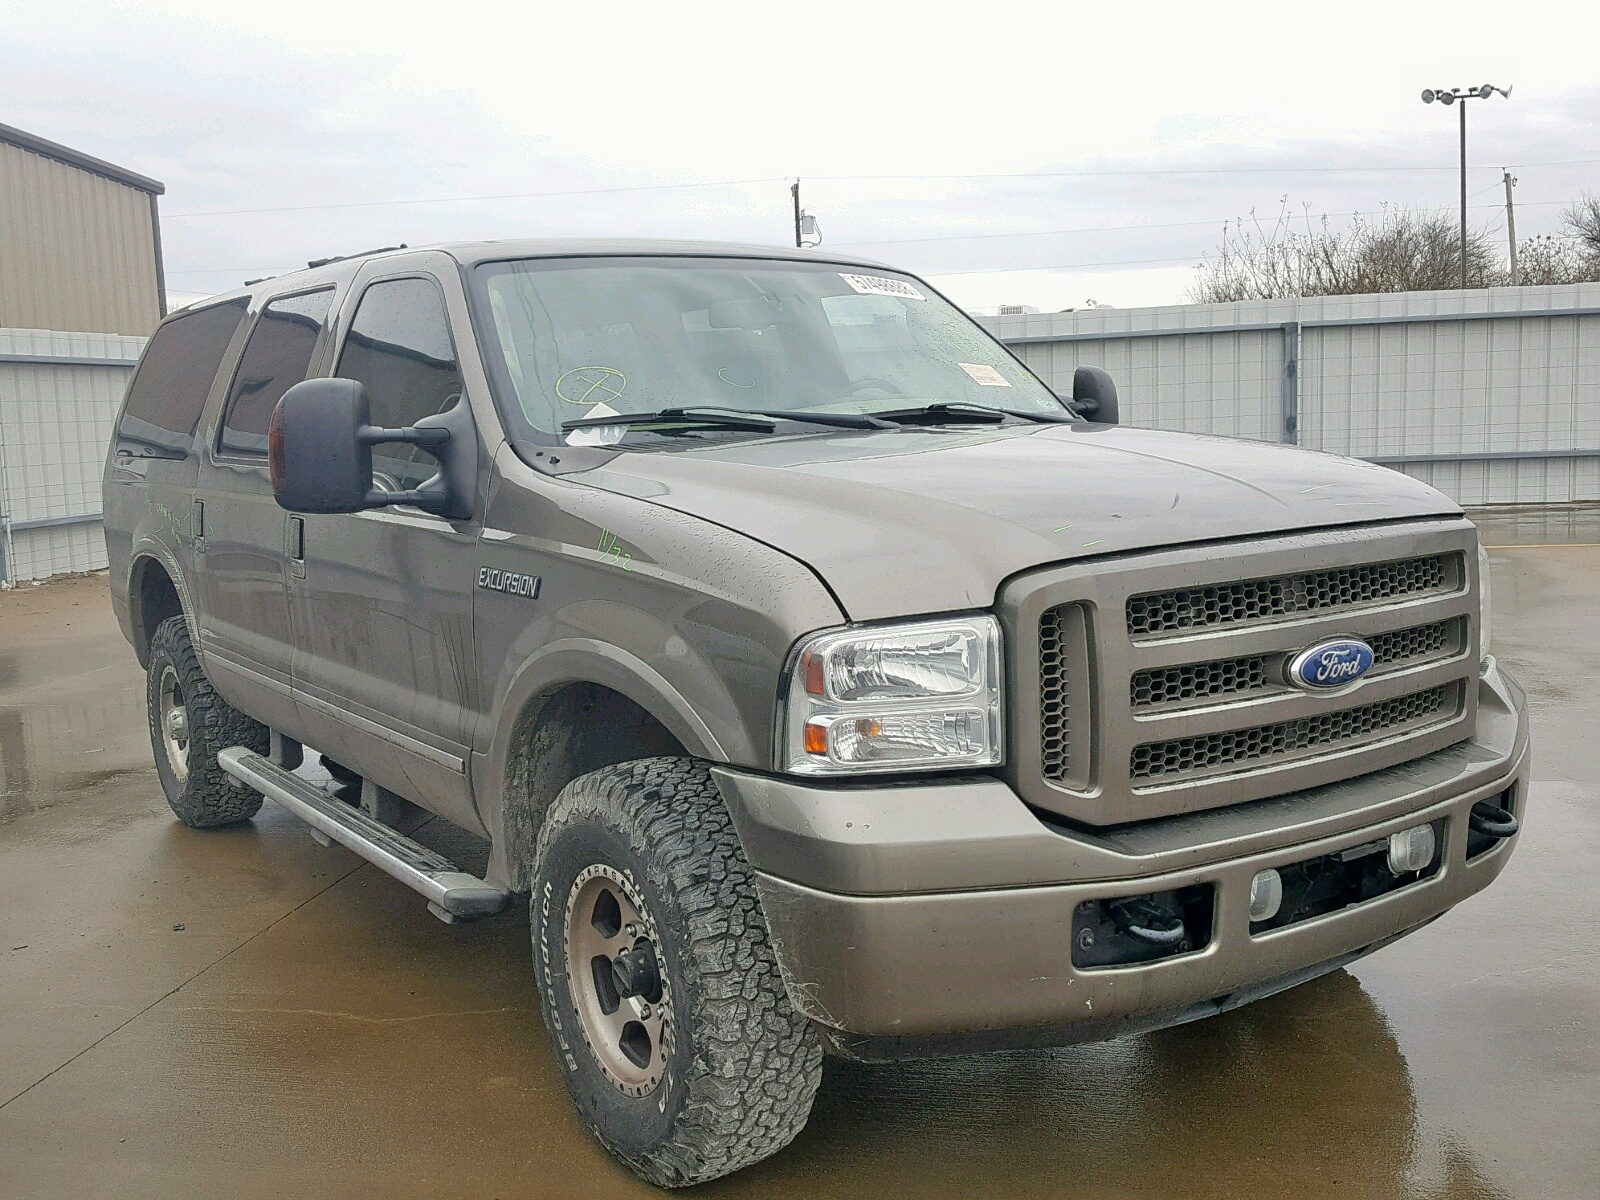 2005 ford excursion for sale in texas